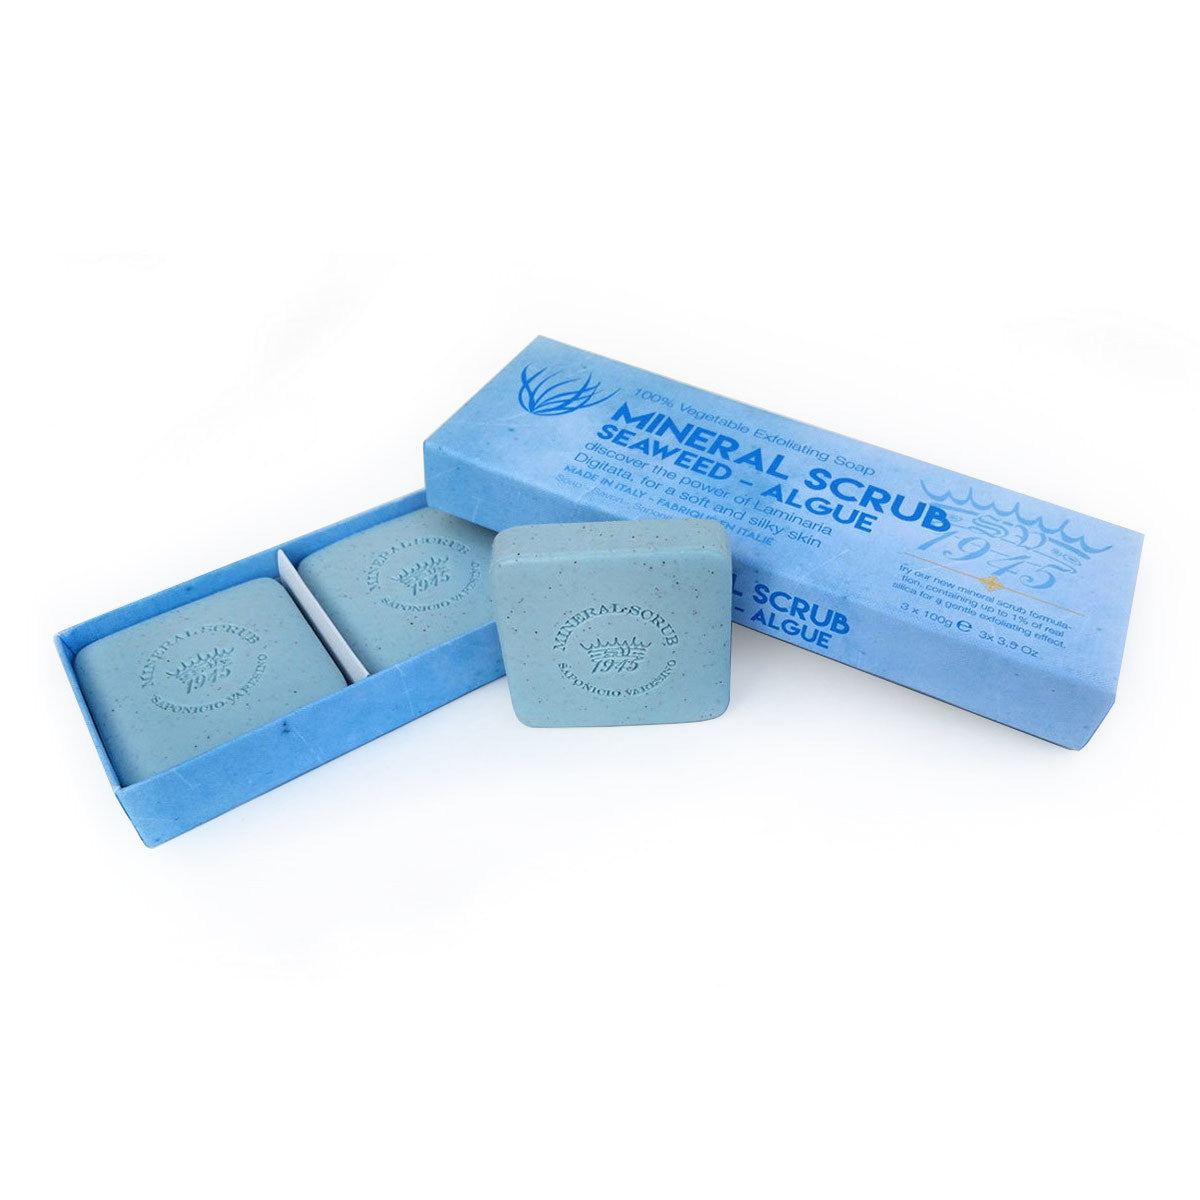 Primary image of Seaweed Mineral Scrub Soap Set